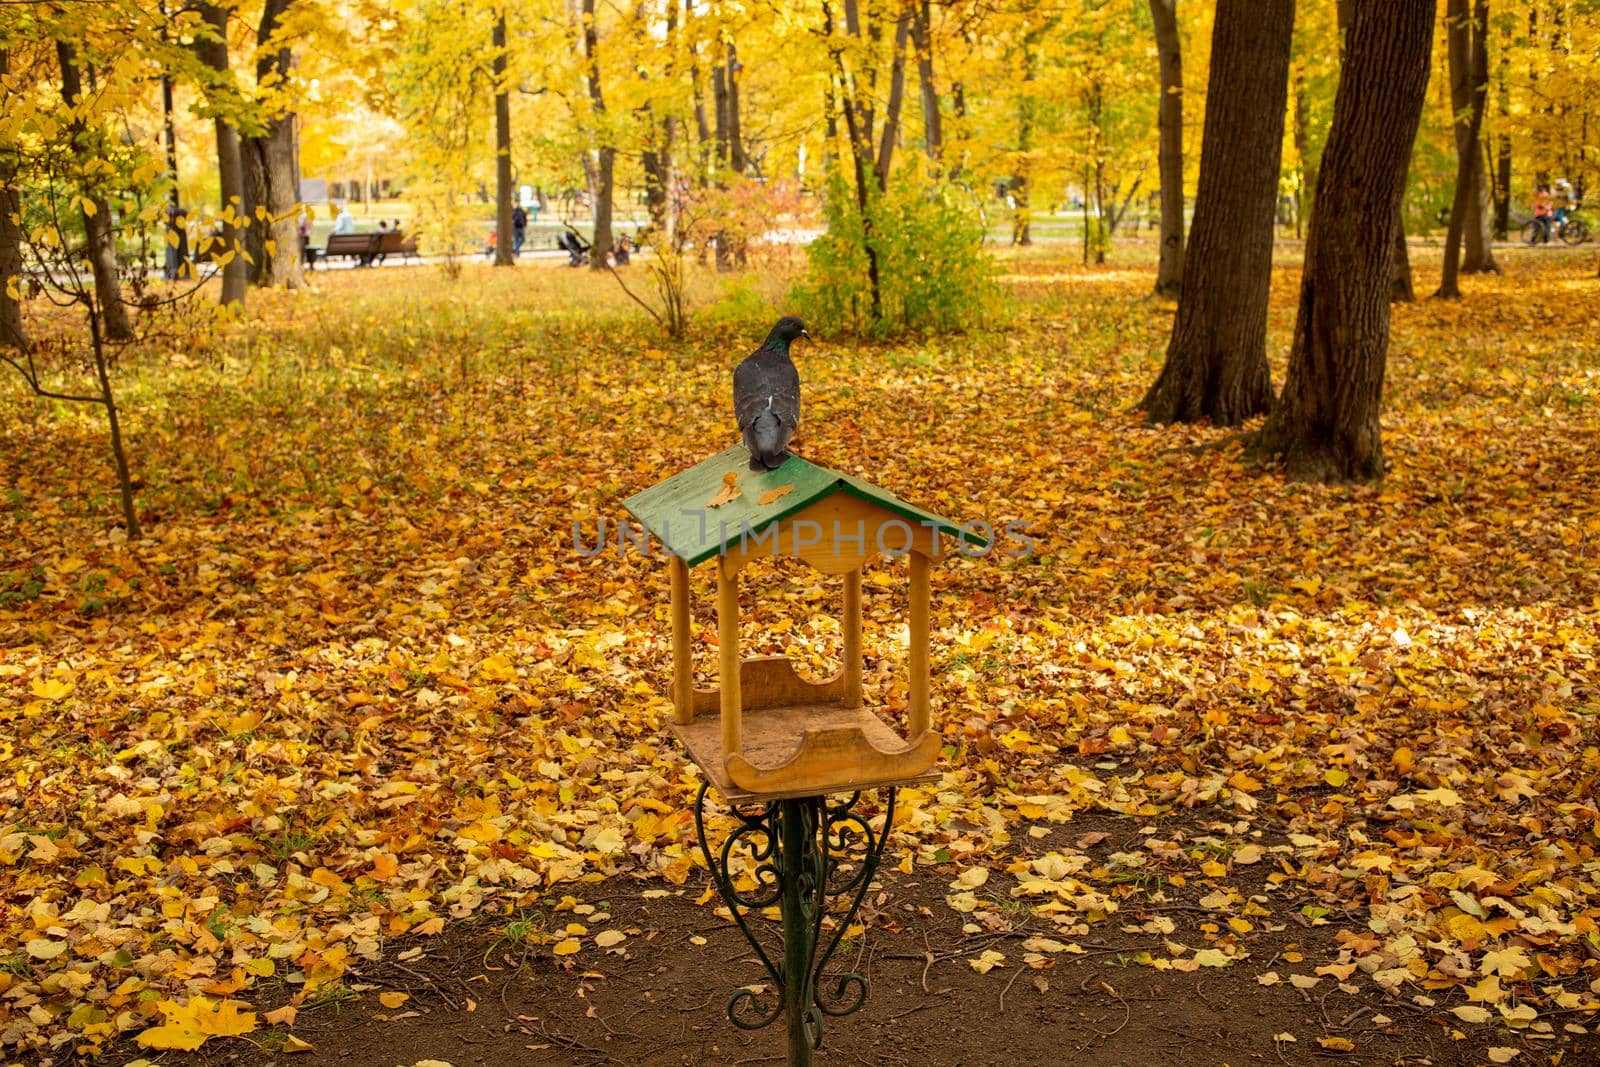 city pigeon sitting on bird feeder in autumn park surrounded by golden leaves